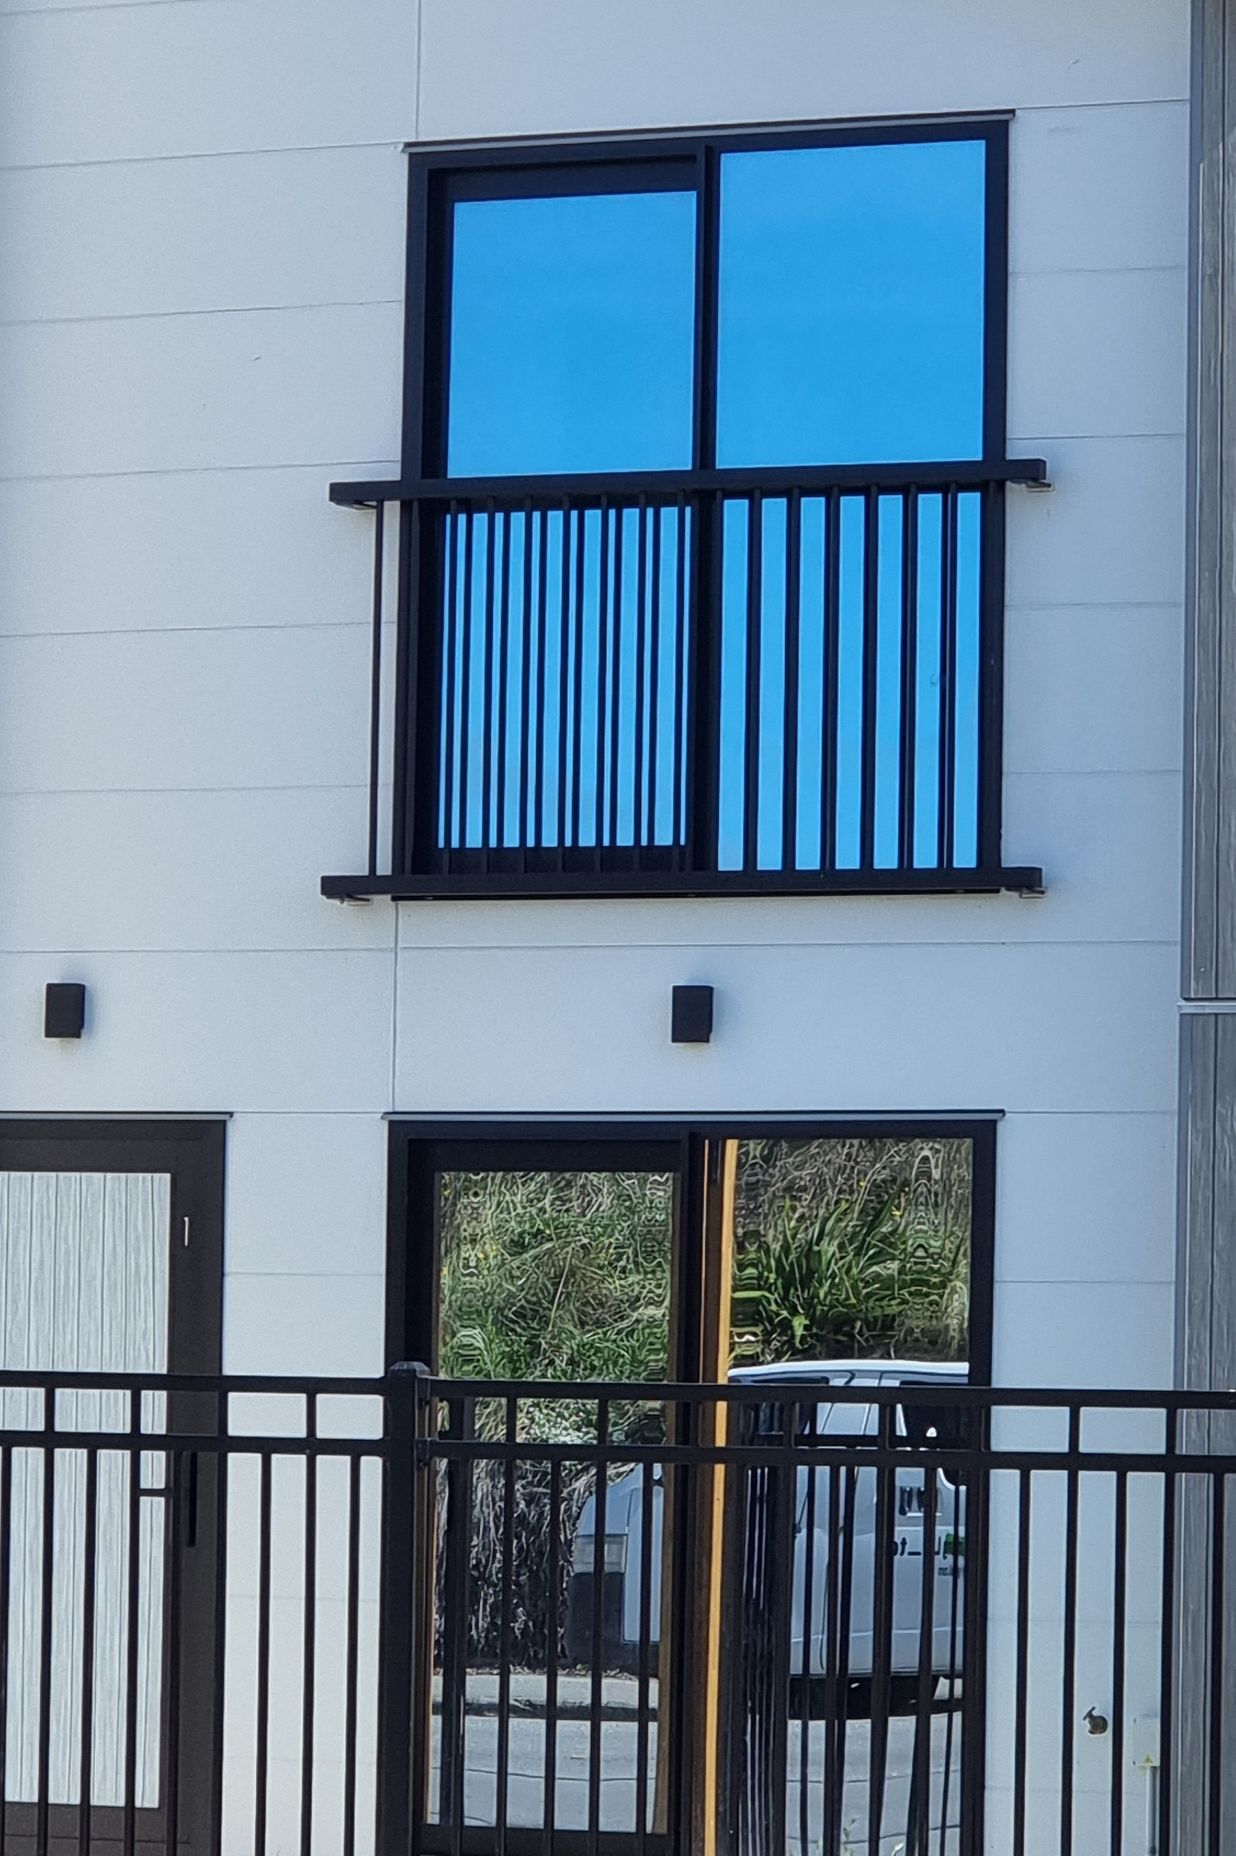 Vertical balusters are a popular option for the Juliette balustrade.